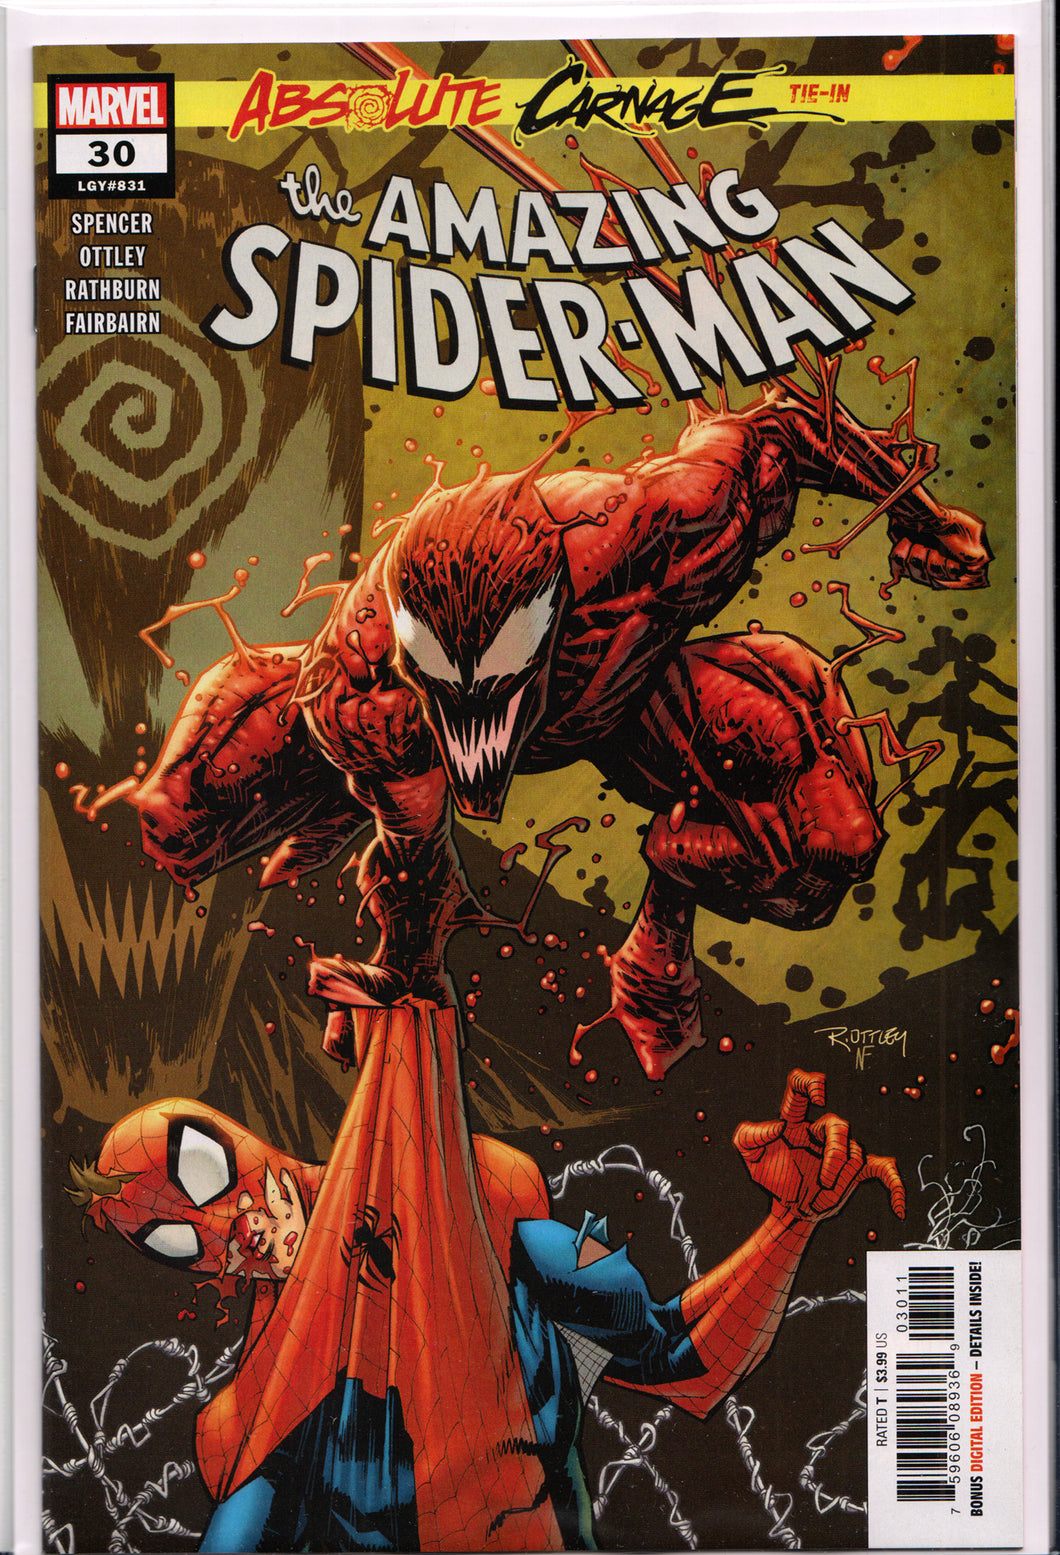 AMAZING SPIDER-MAN #30 (ABSOLUTE CARNAGE TIE-IN) COMIC BOOK ~ Marvel Comics